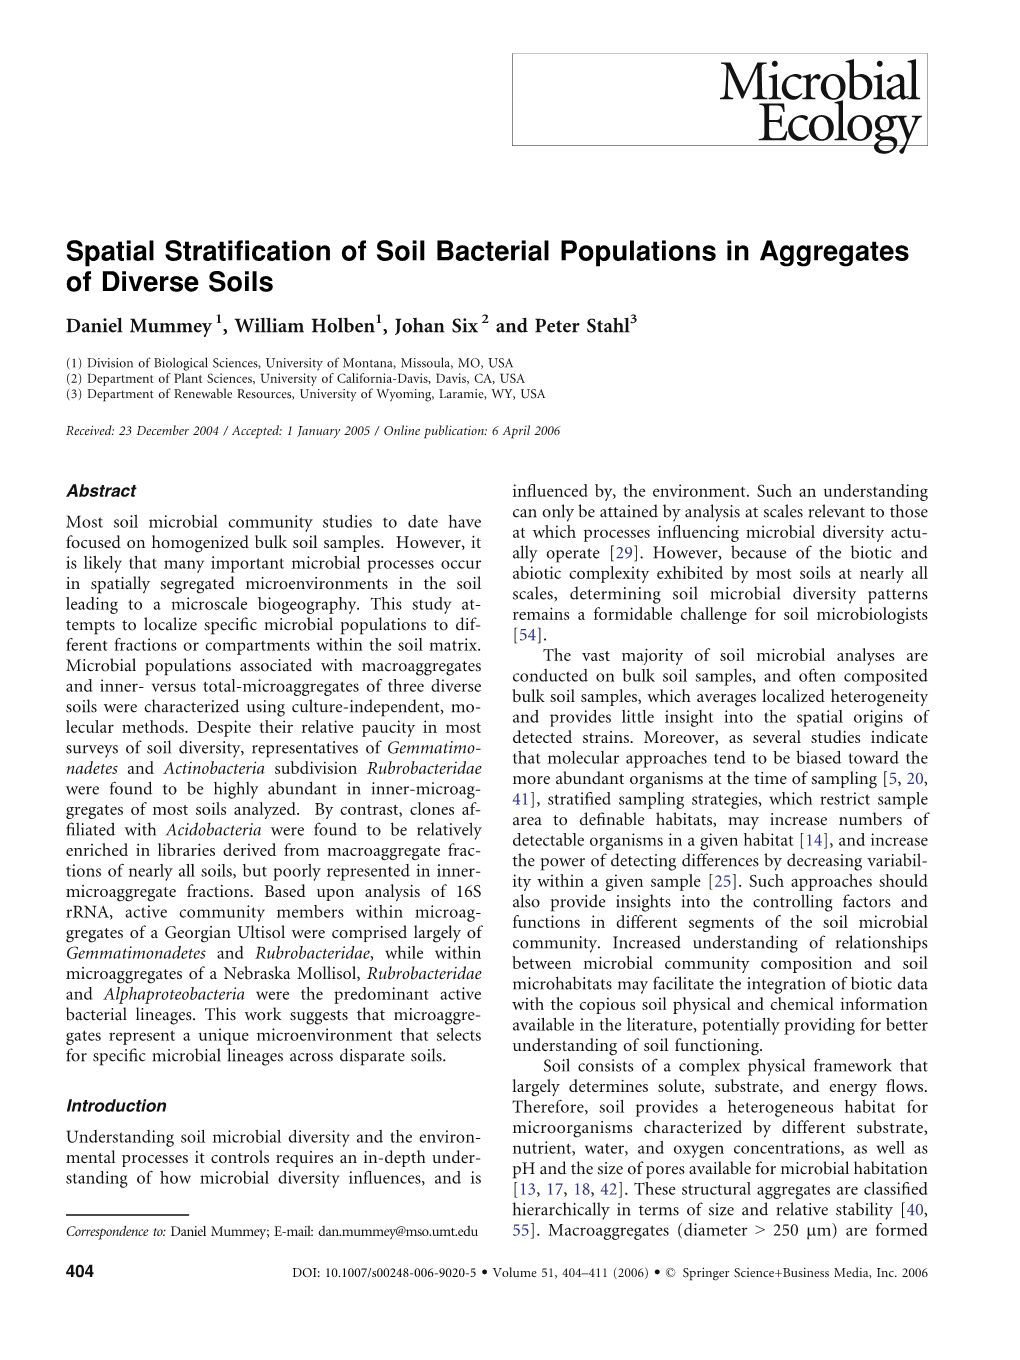 Spatial Stratification of Soil Bacterial Populations in Aggregates of Diverse Soils Daniel Mummey 1, William Holben1, Johan Six 2 and Peter Stahl3